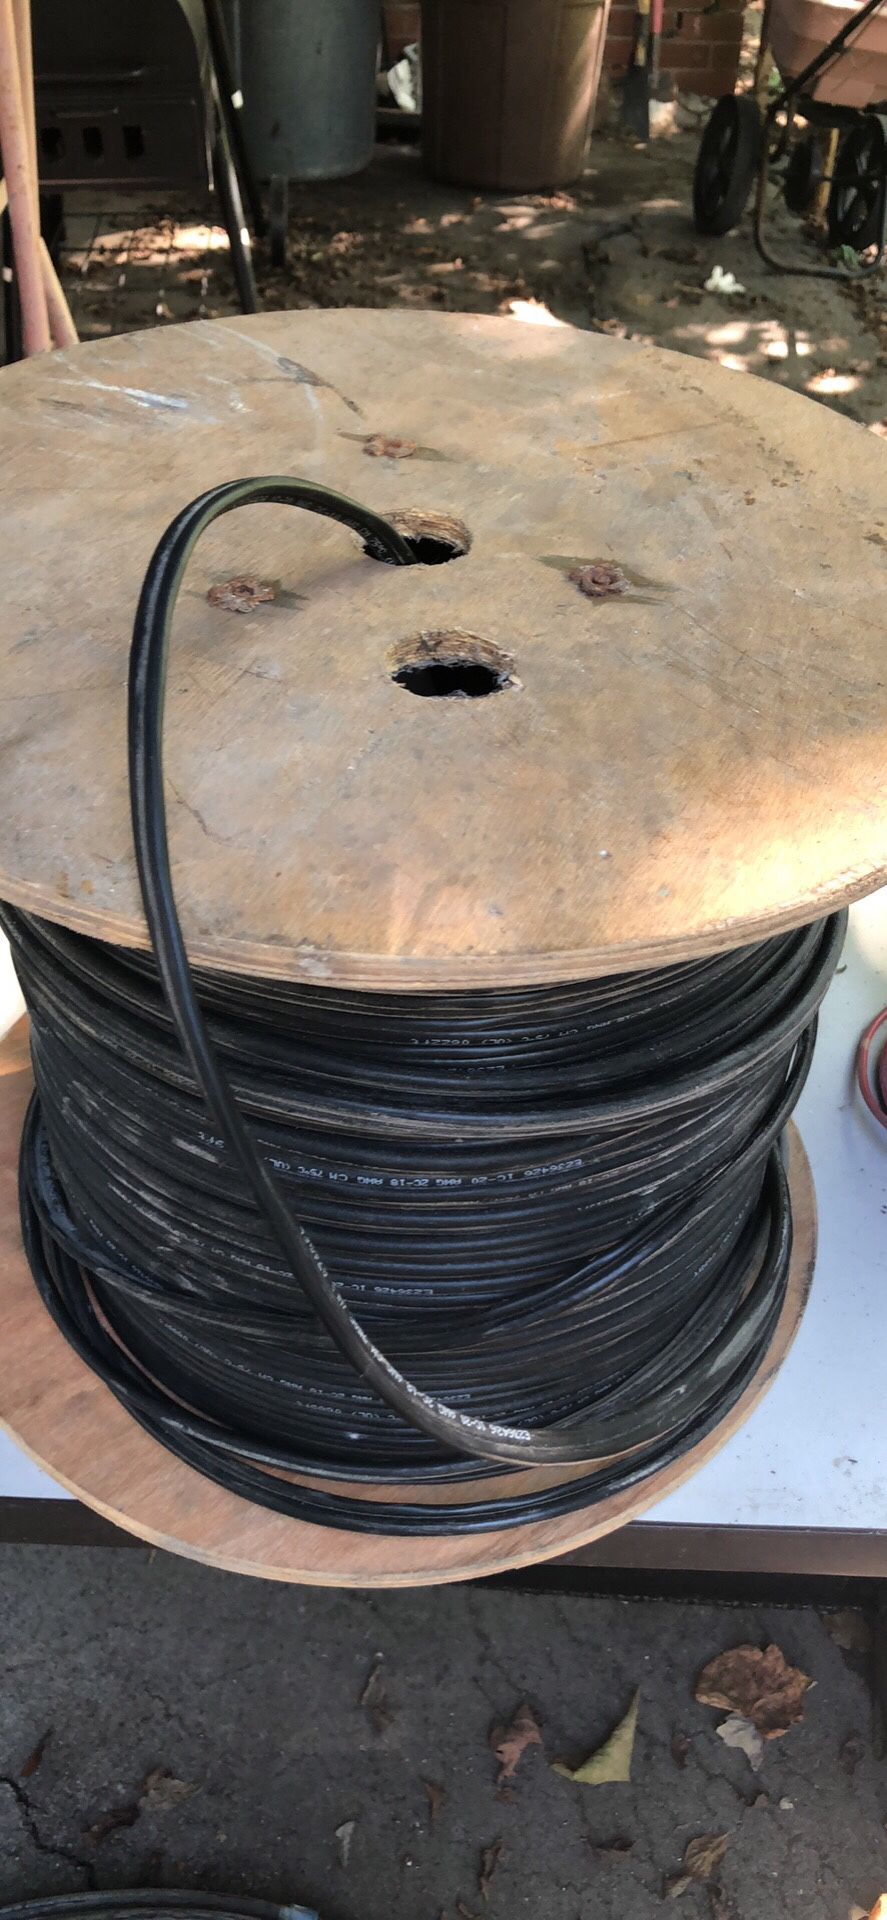 Misc Copper Stranded Wiring !!! 200 for all ,, black wire on ground is 125 ft